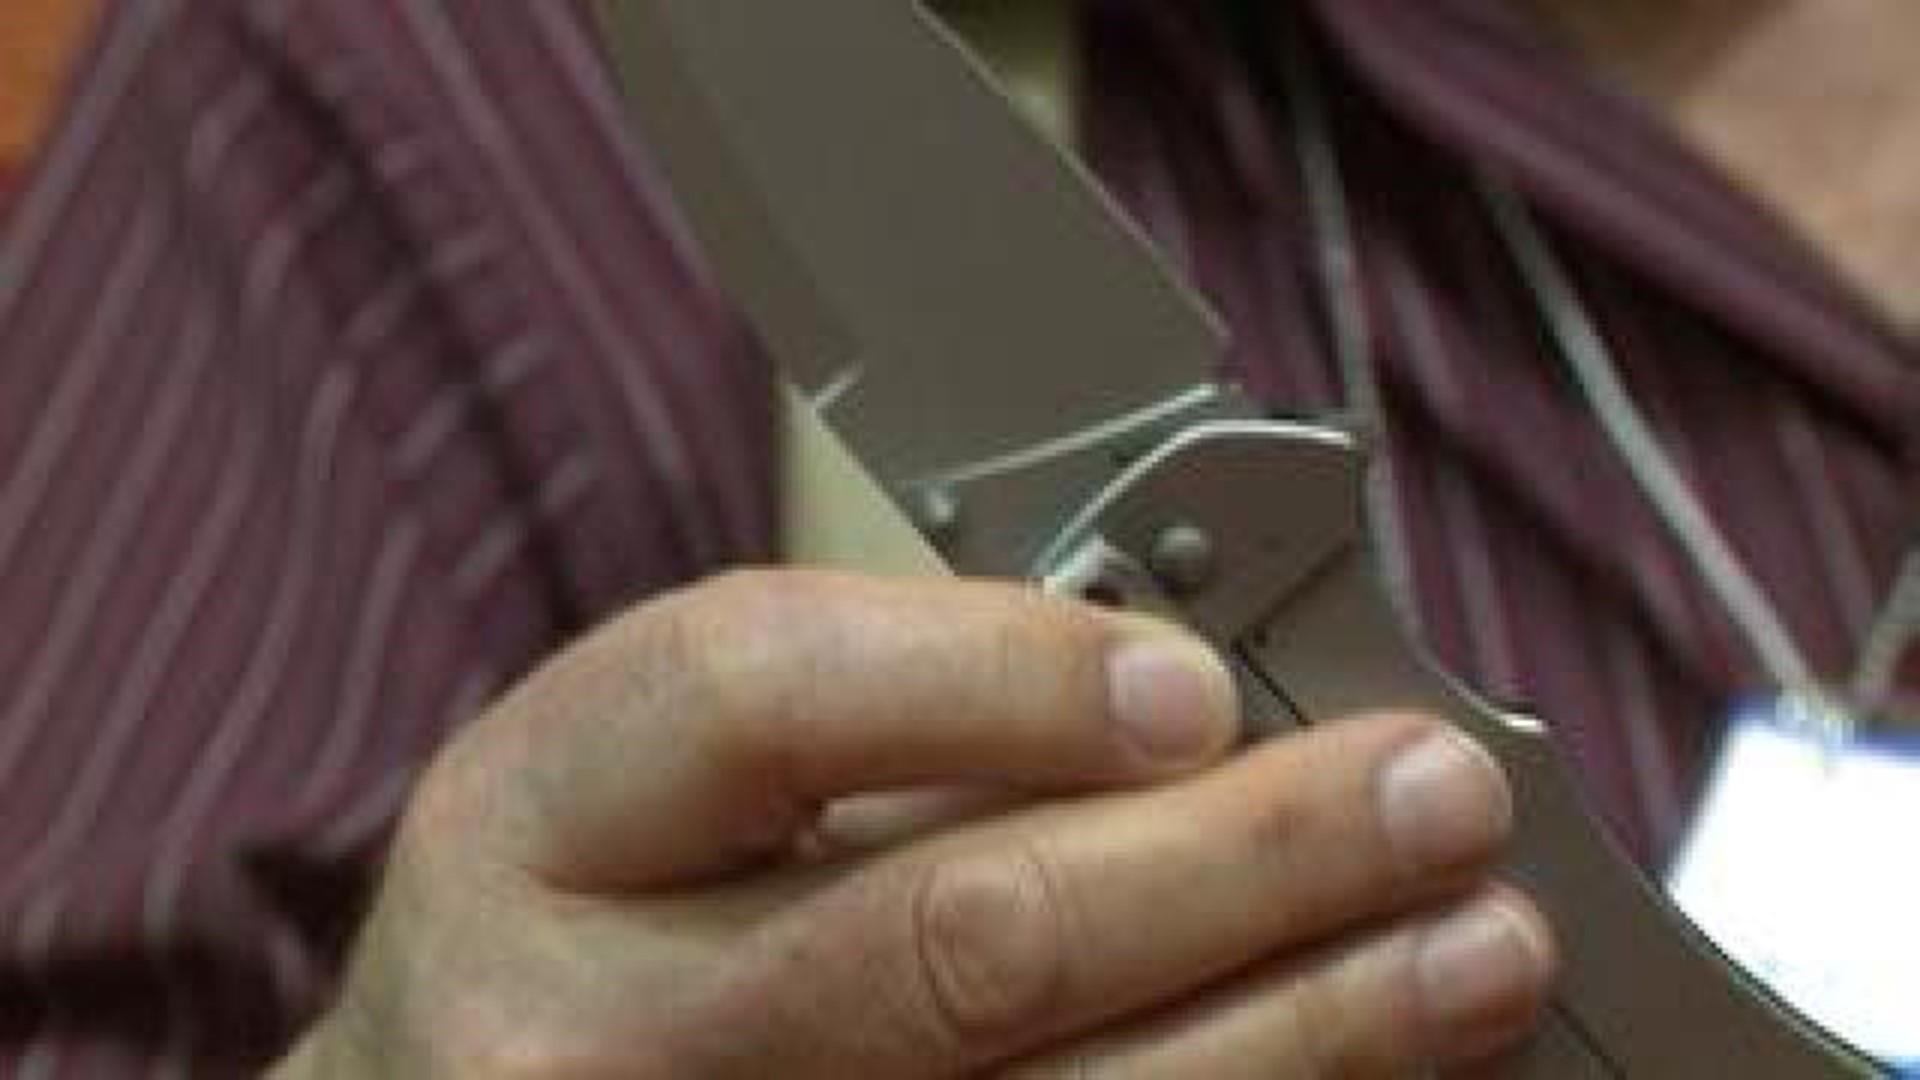 A.G. Russell Knife Event Draws in Thousands